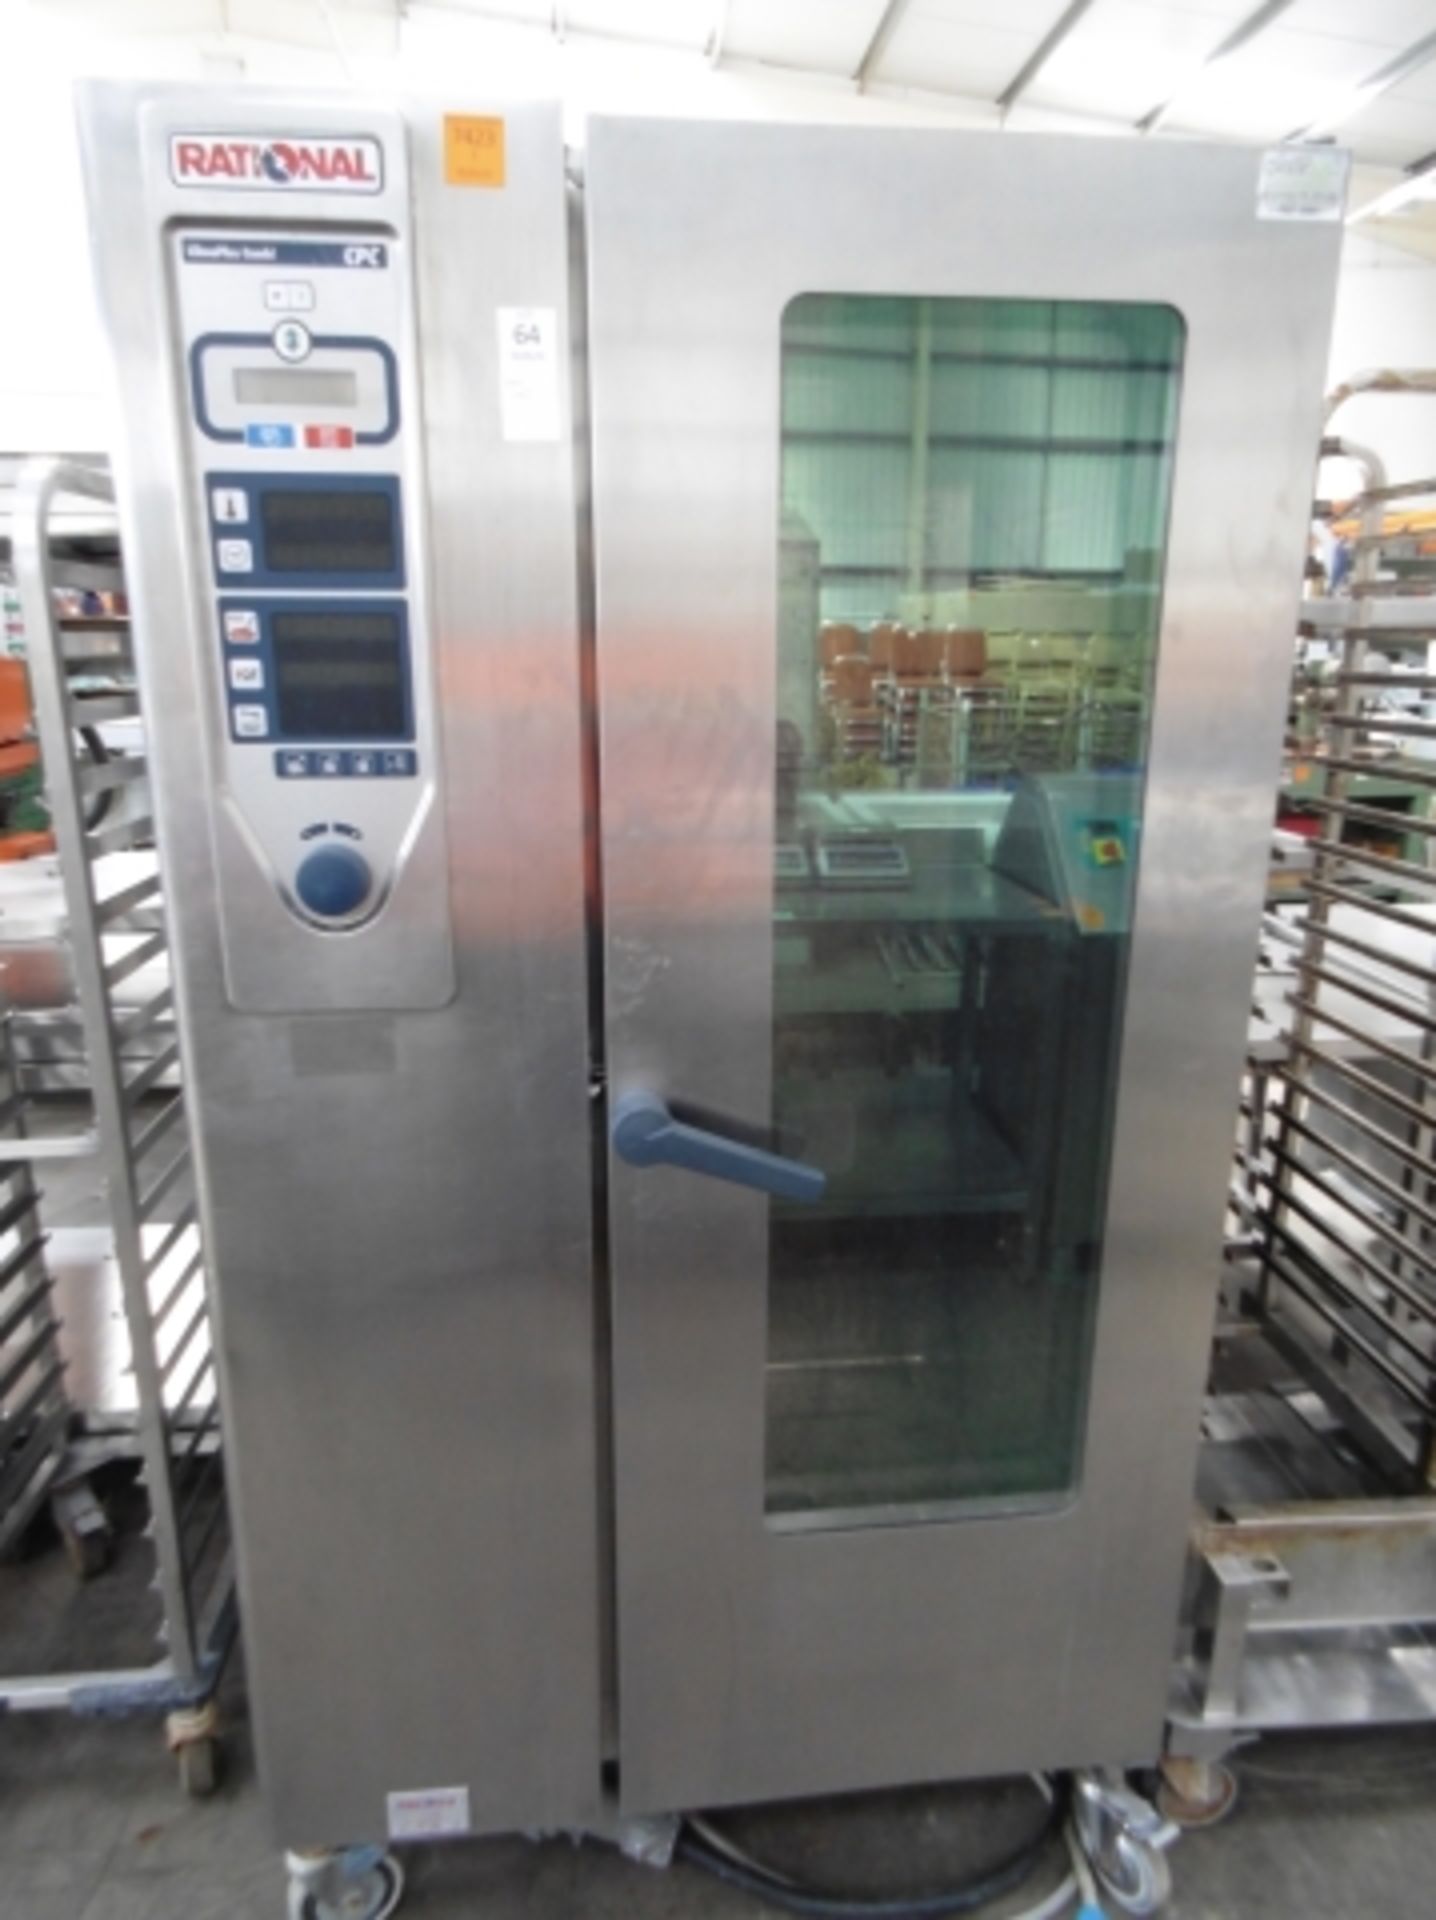 * Rational Clima Combi Plus CPC Combi Oven; 3 Phase - 400V; c/w stainless steel rack trolley. Please